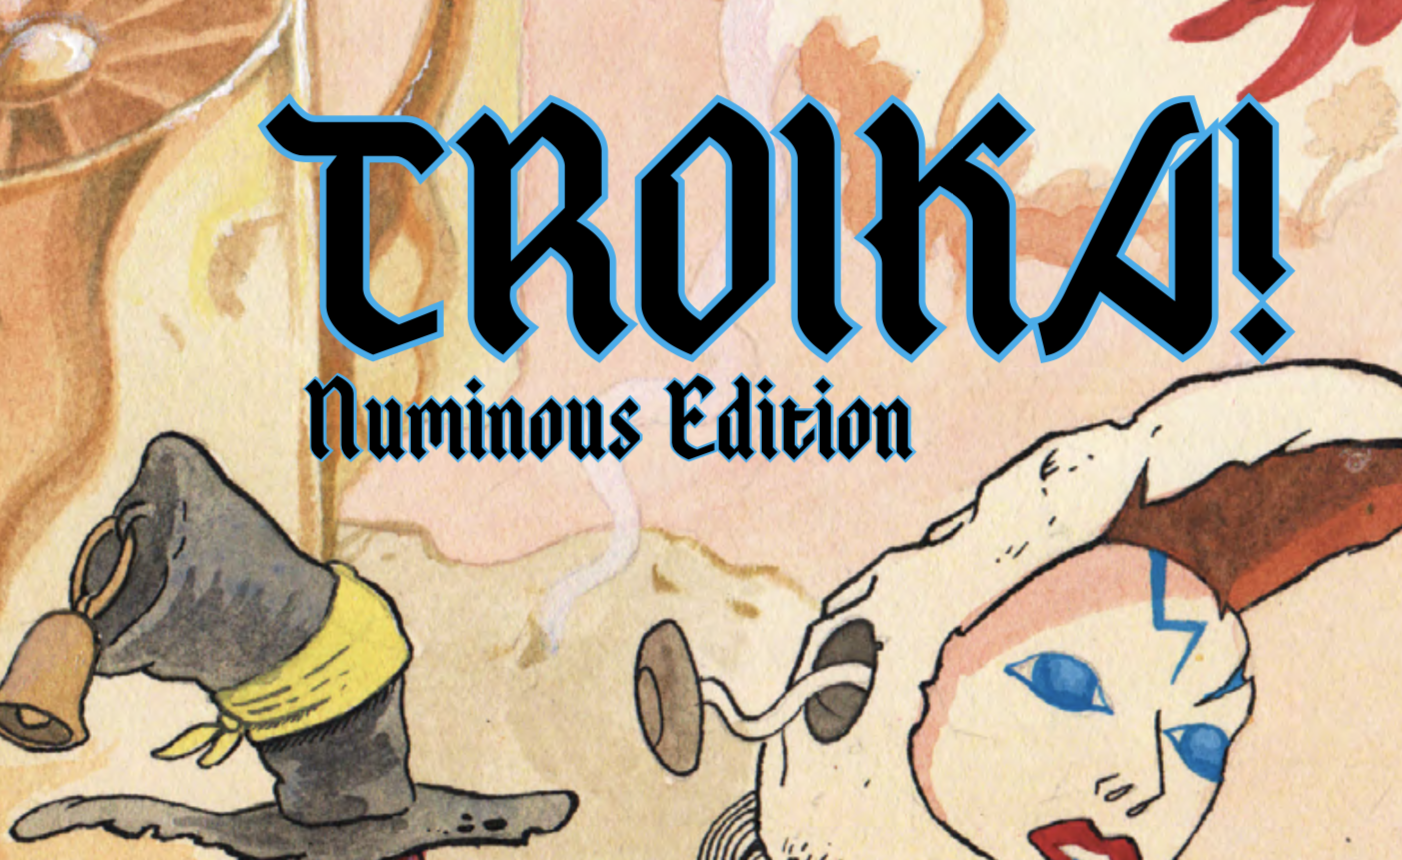 Troika! Reference